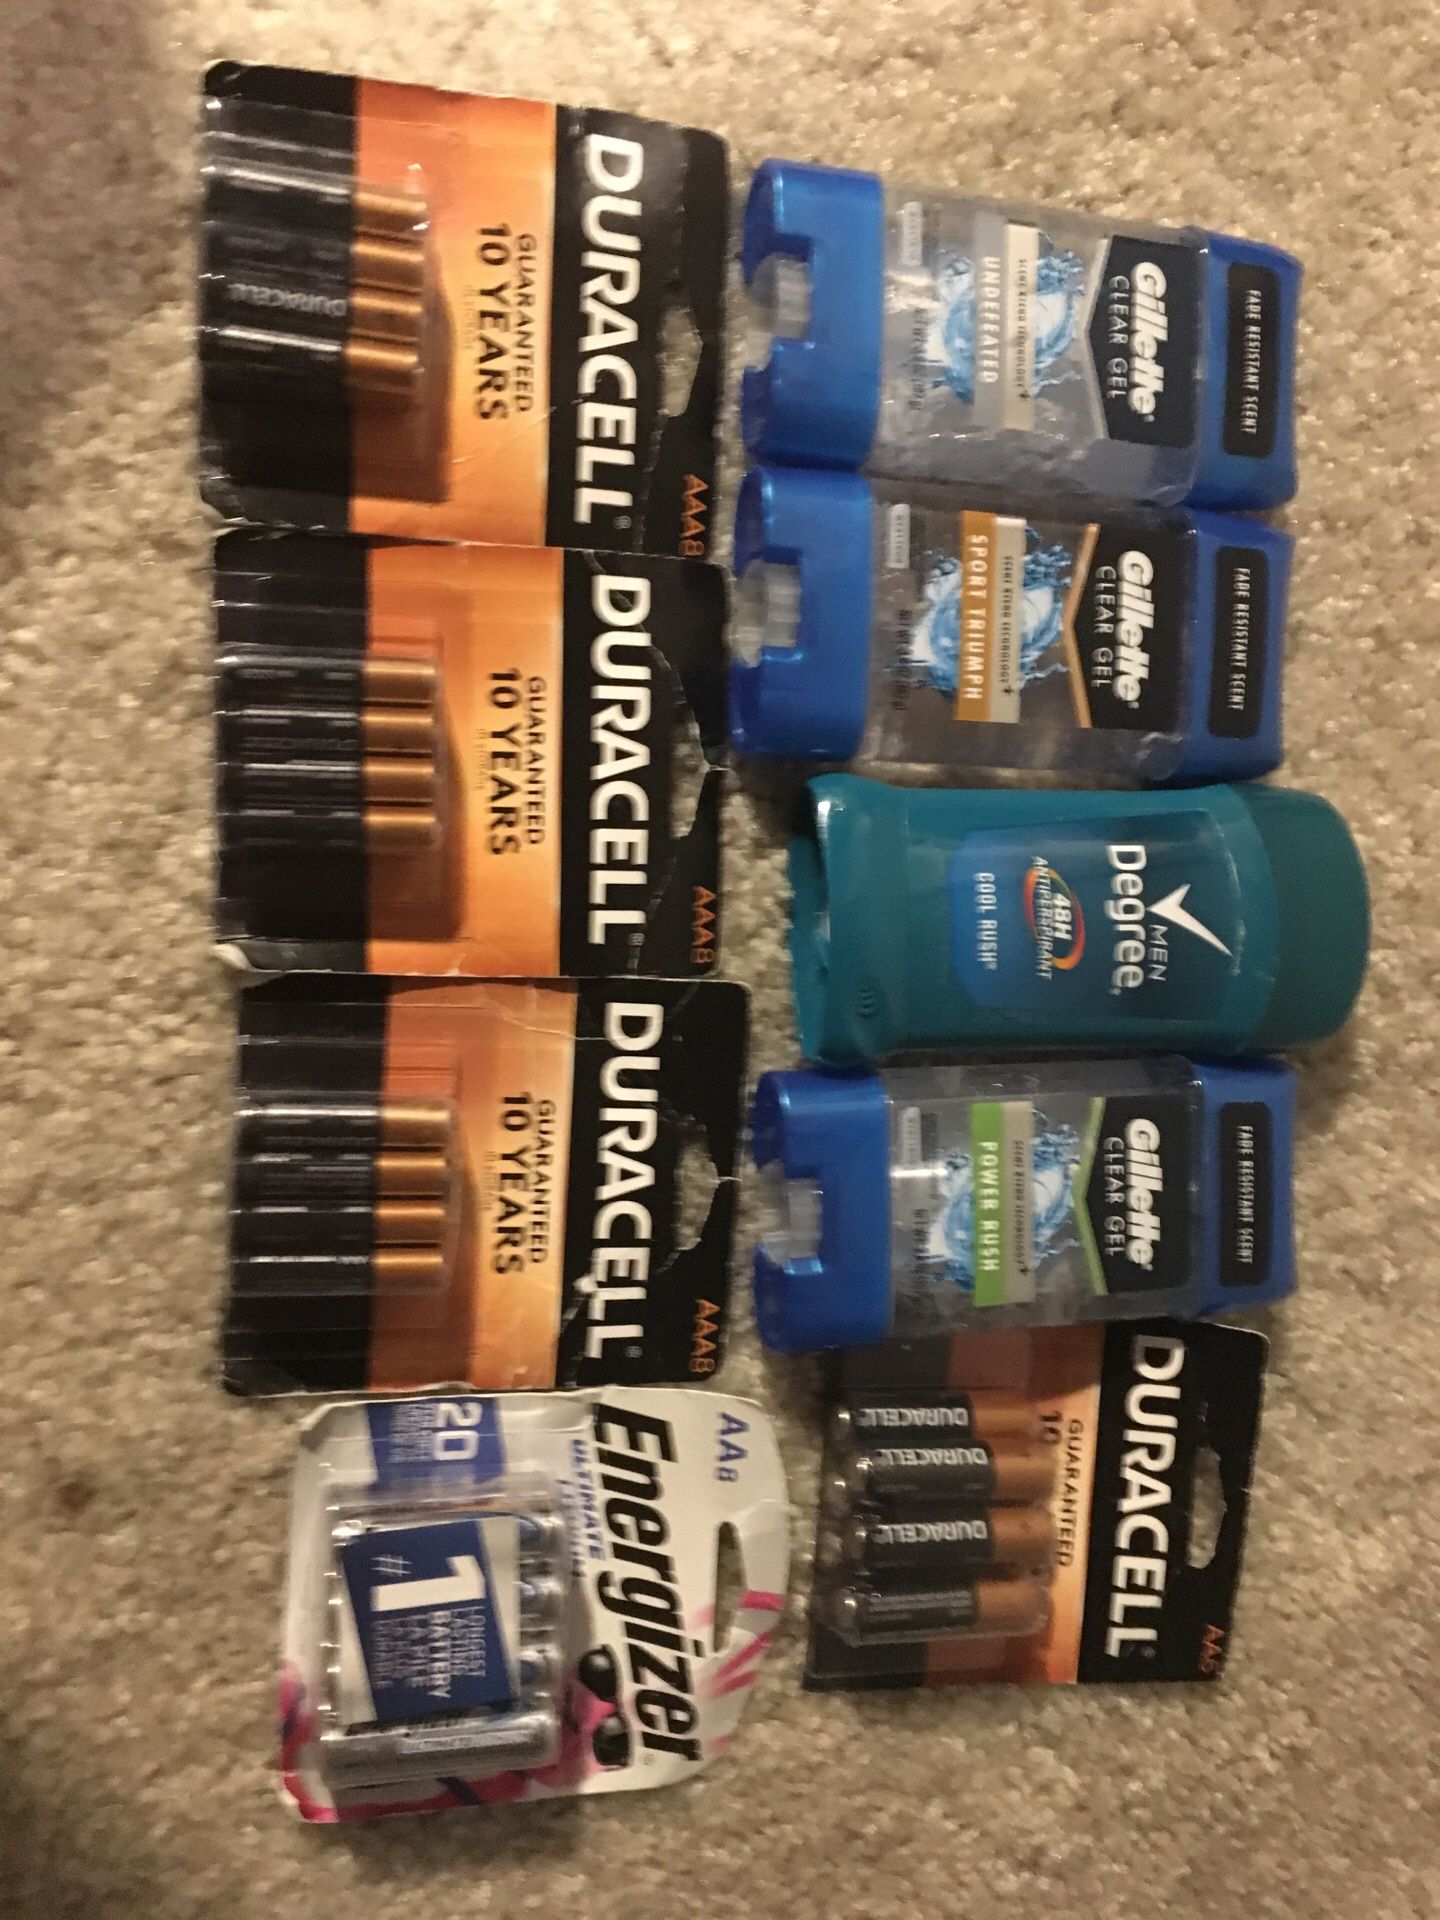 New 3 pack of triple aaa Duracell batteries&1 double aa energizer pack&3 gillette deoderants&1 men’s degree deodorant